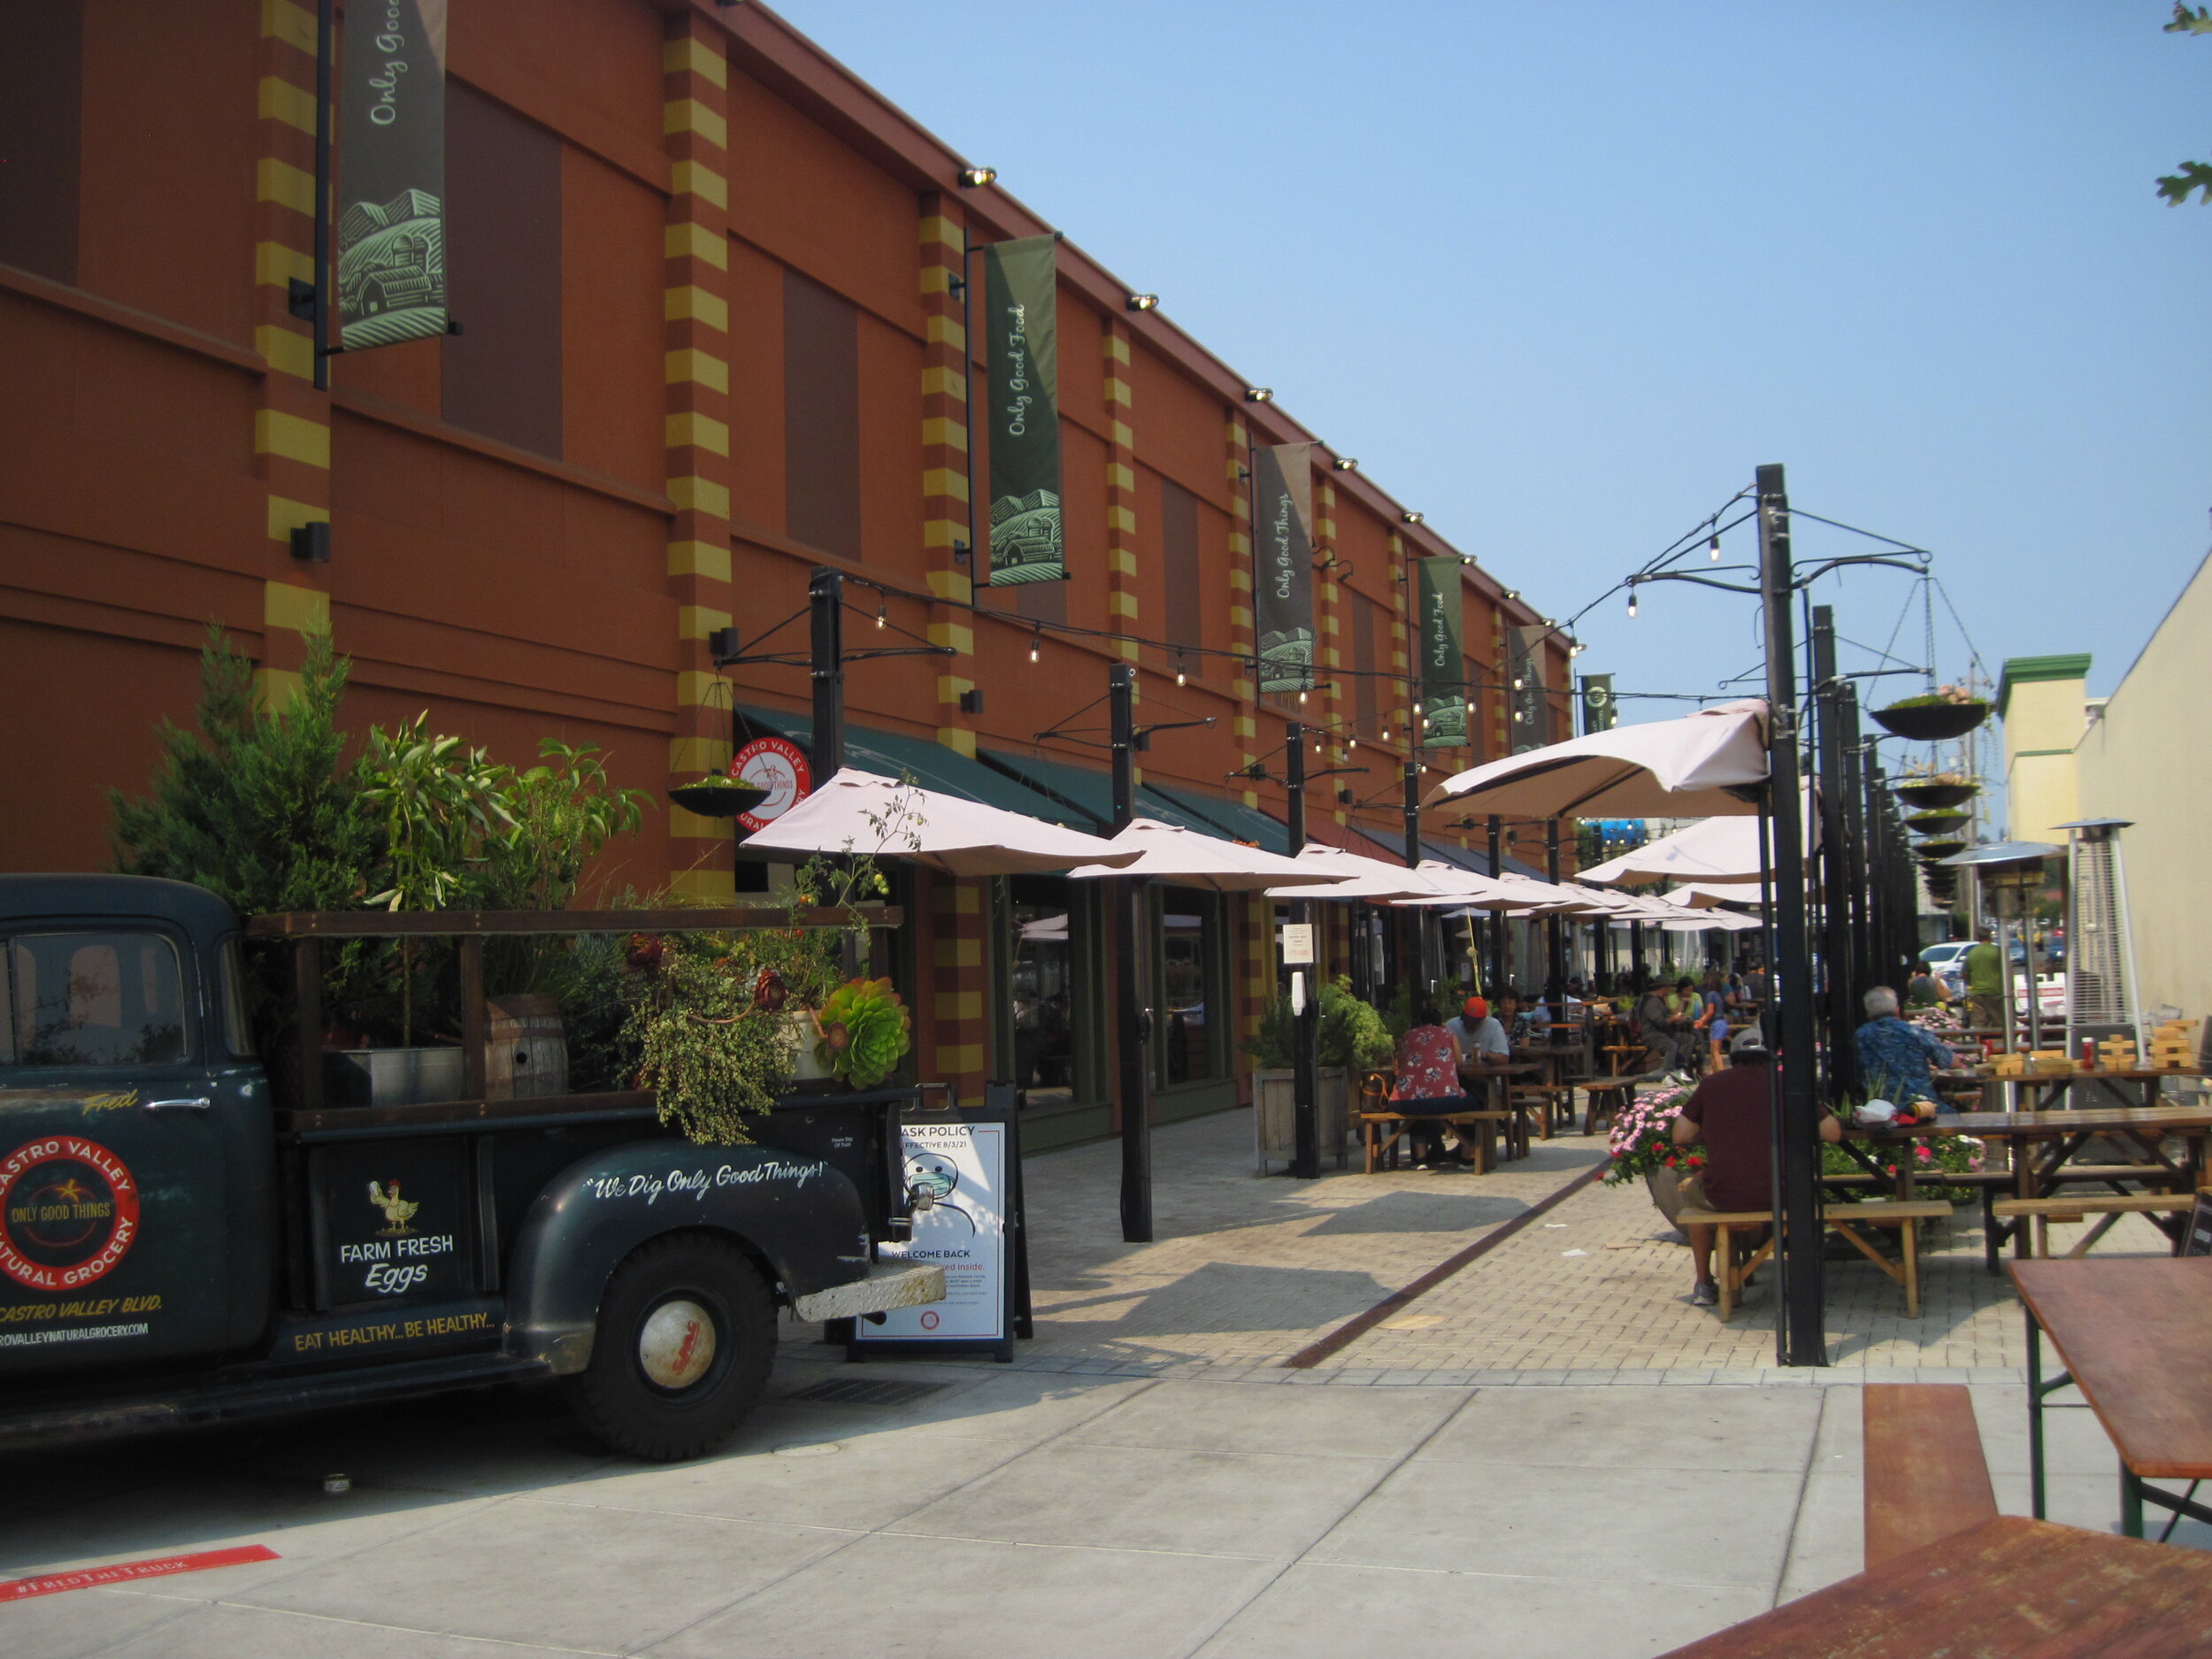   Paseo area of the Castro Valley Marketplace.  